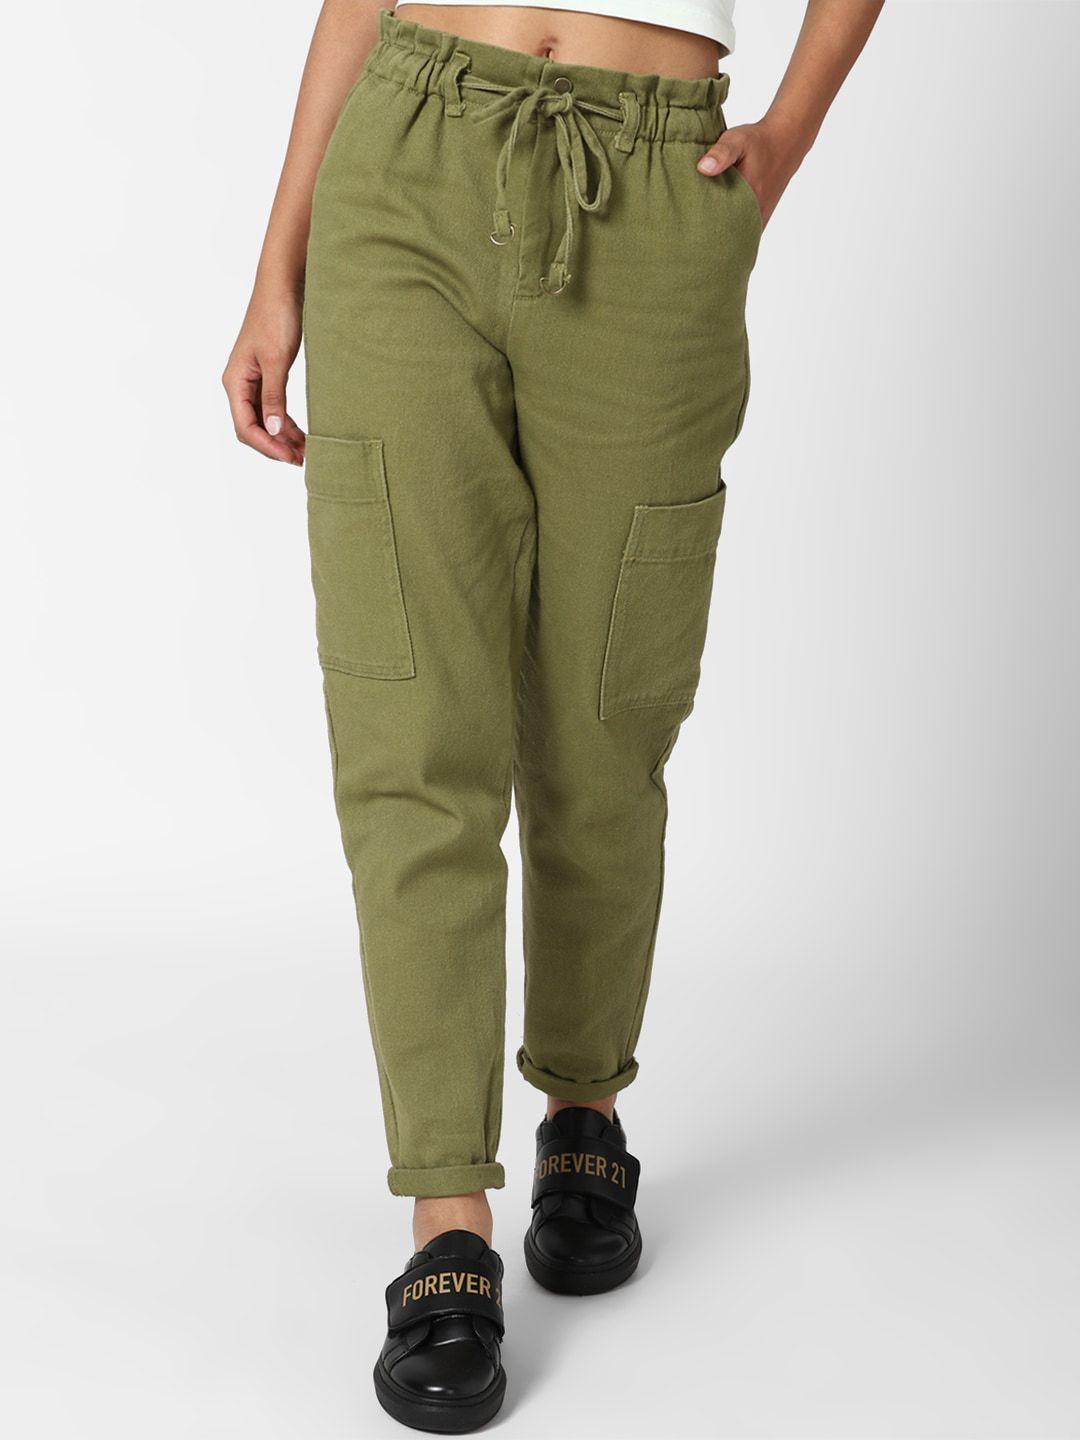 FOREVER 21 Women Olive Green Cargos Cotton Trousers